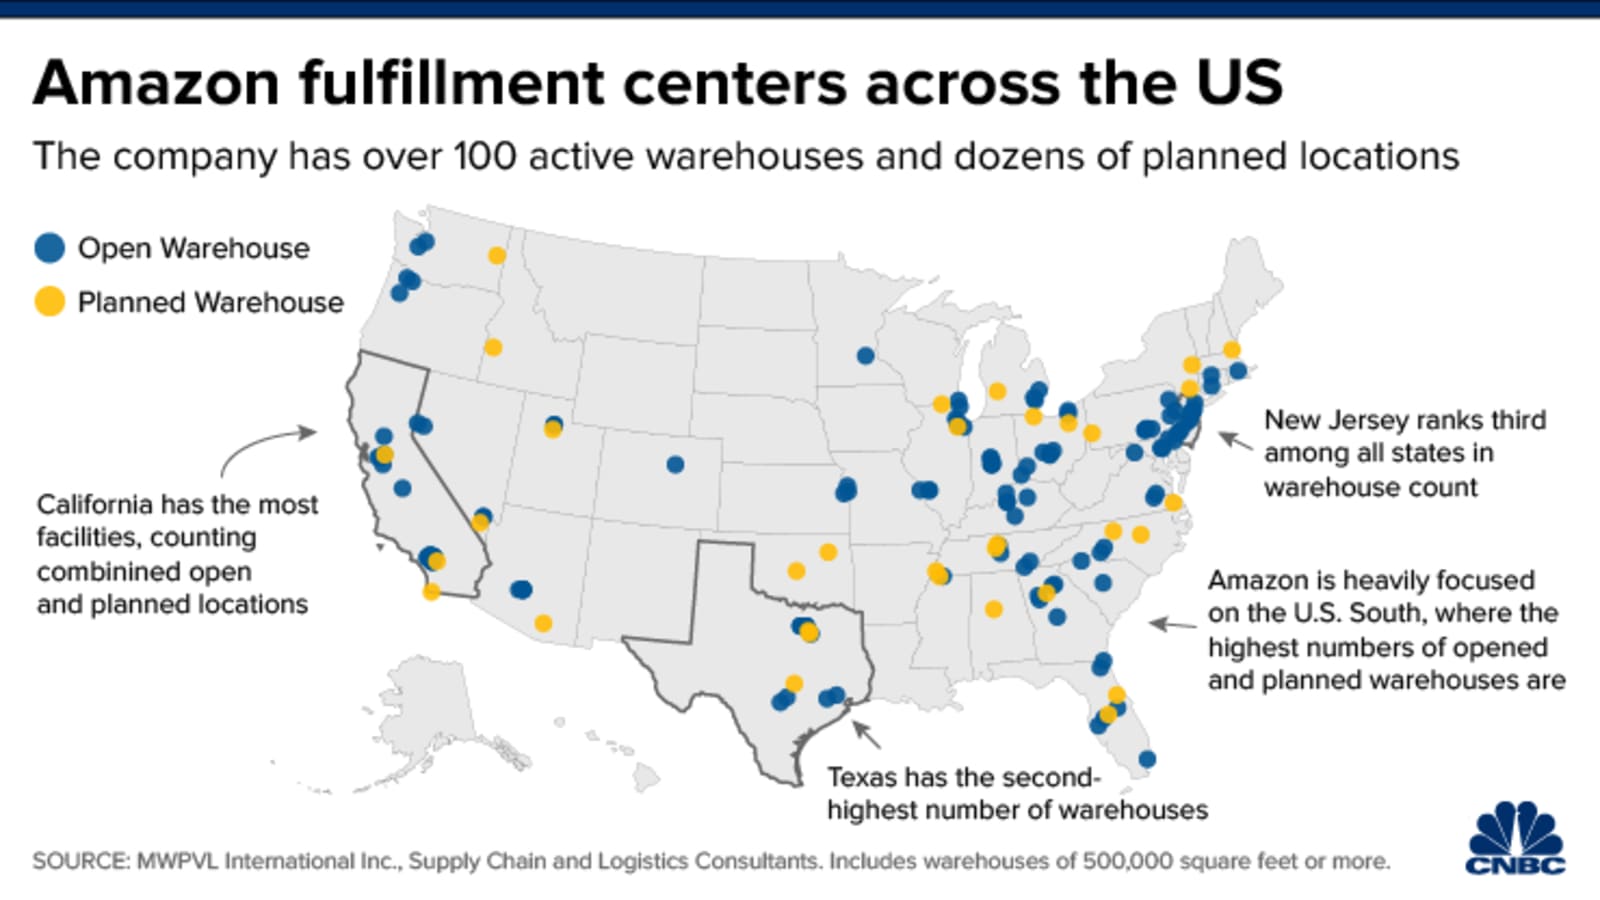 Amazon has over 100 active warehouses in the US.